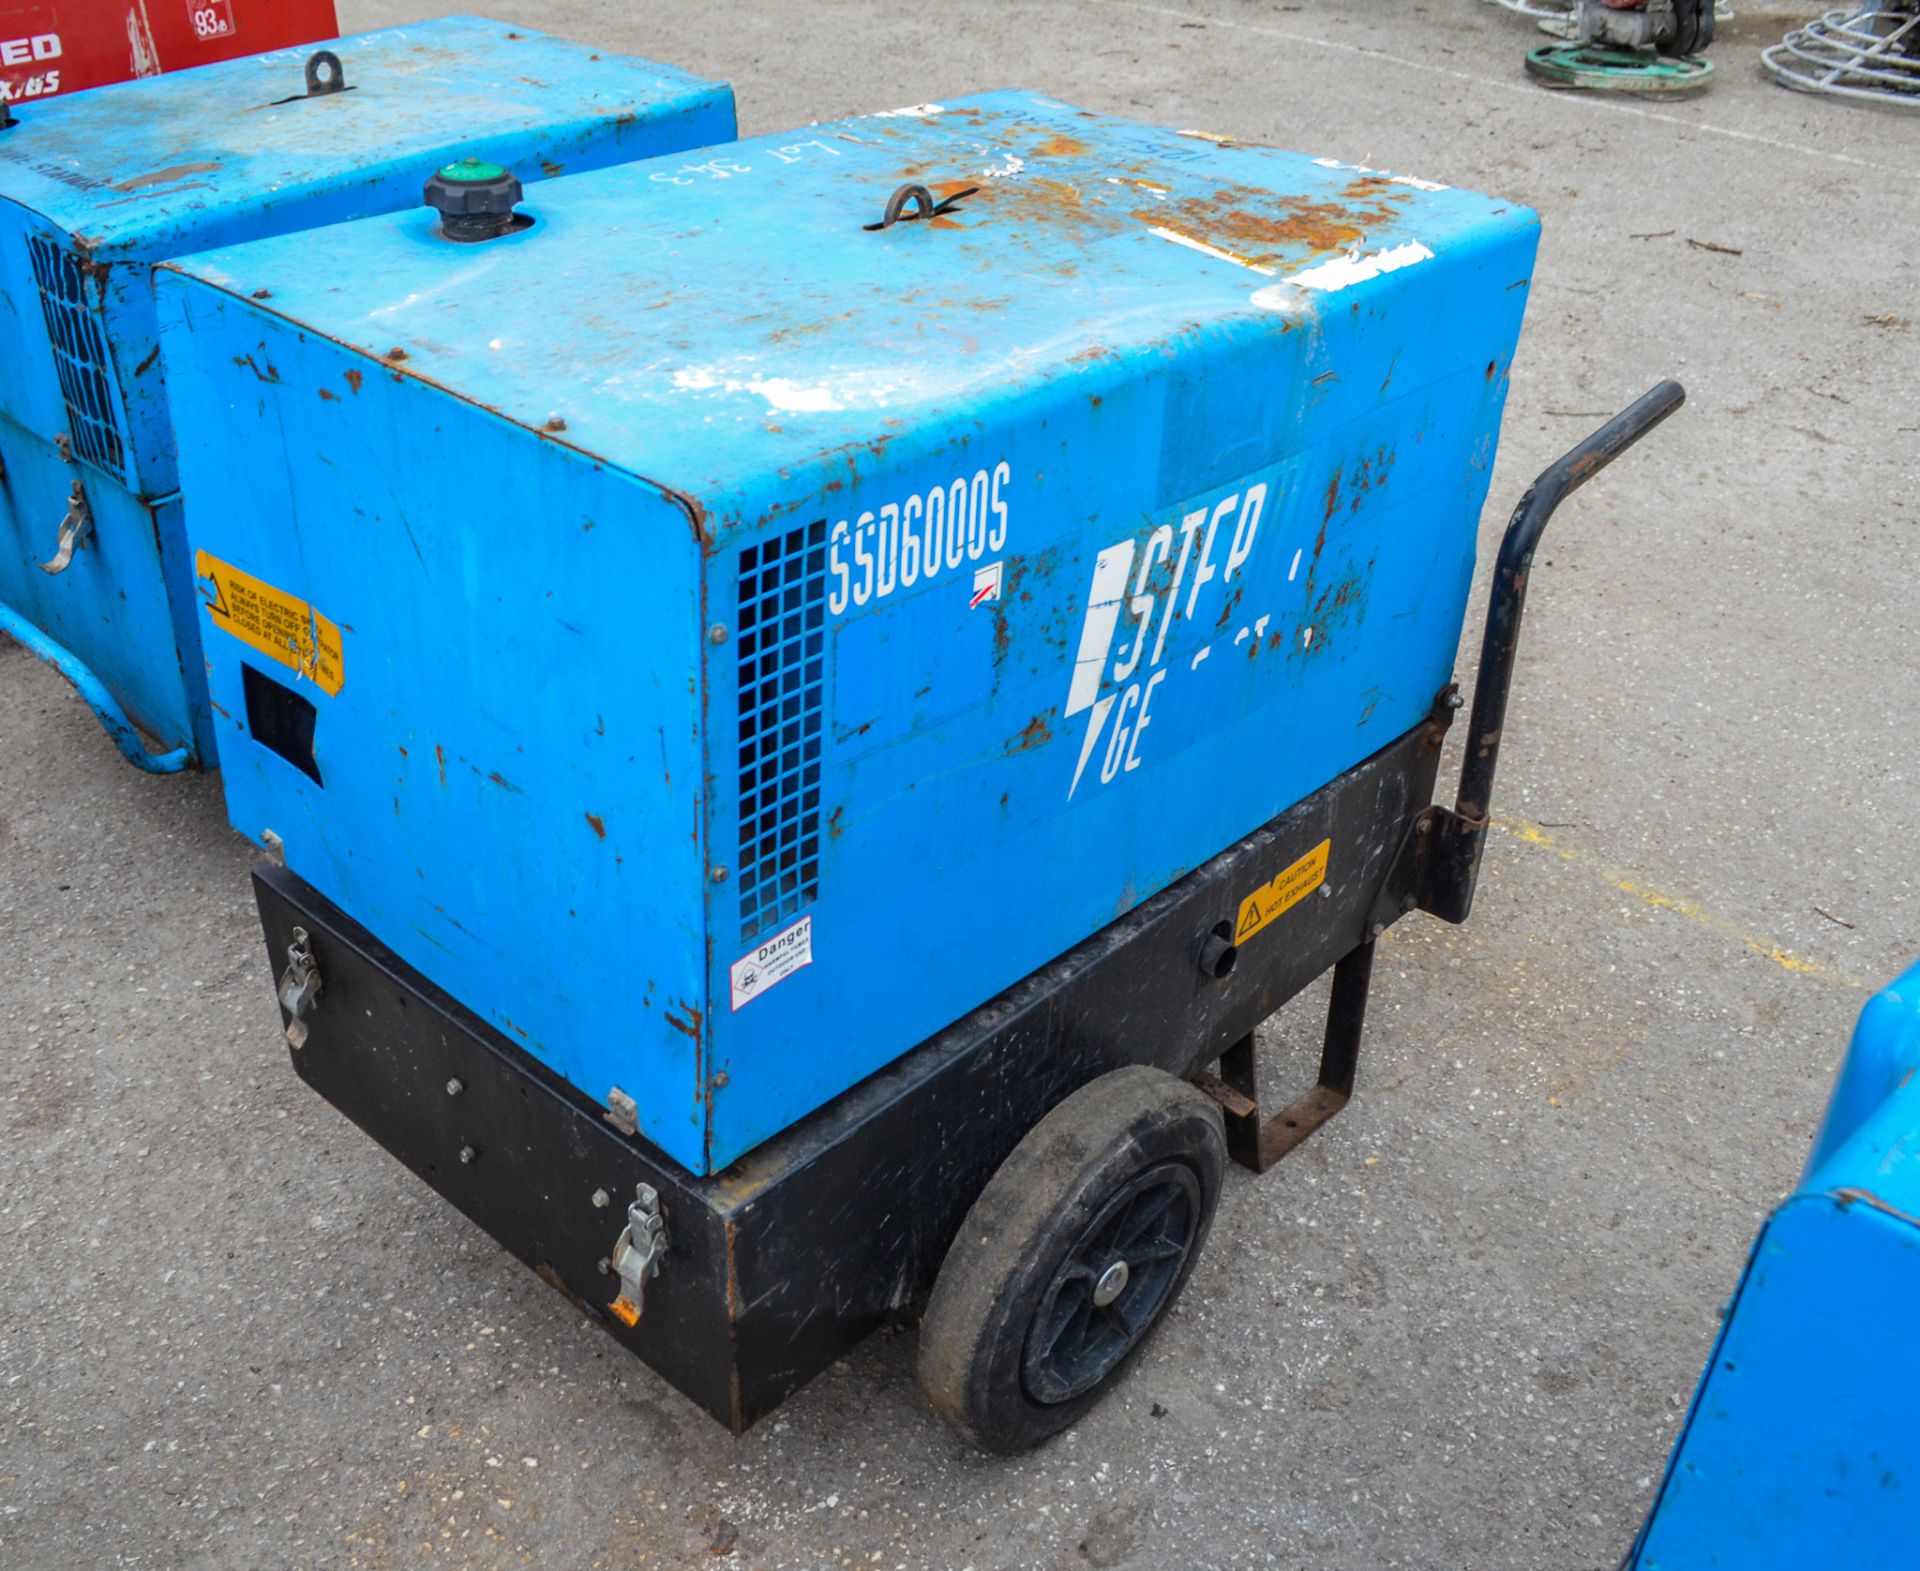 Stephill SSD 600S 6kva diesel driven generator Recorded hours: 2700 1252-048 - Image 2 of 4